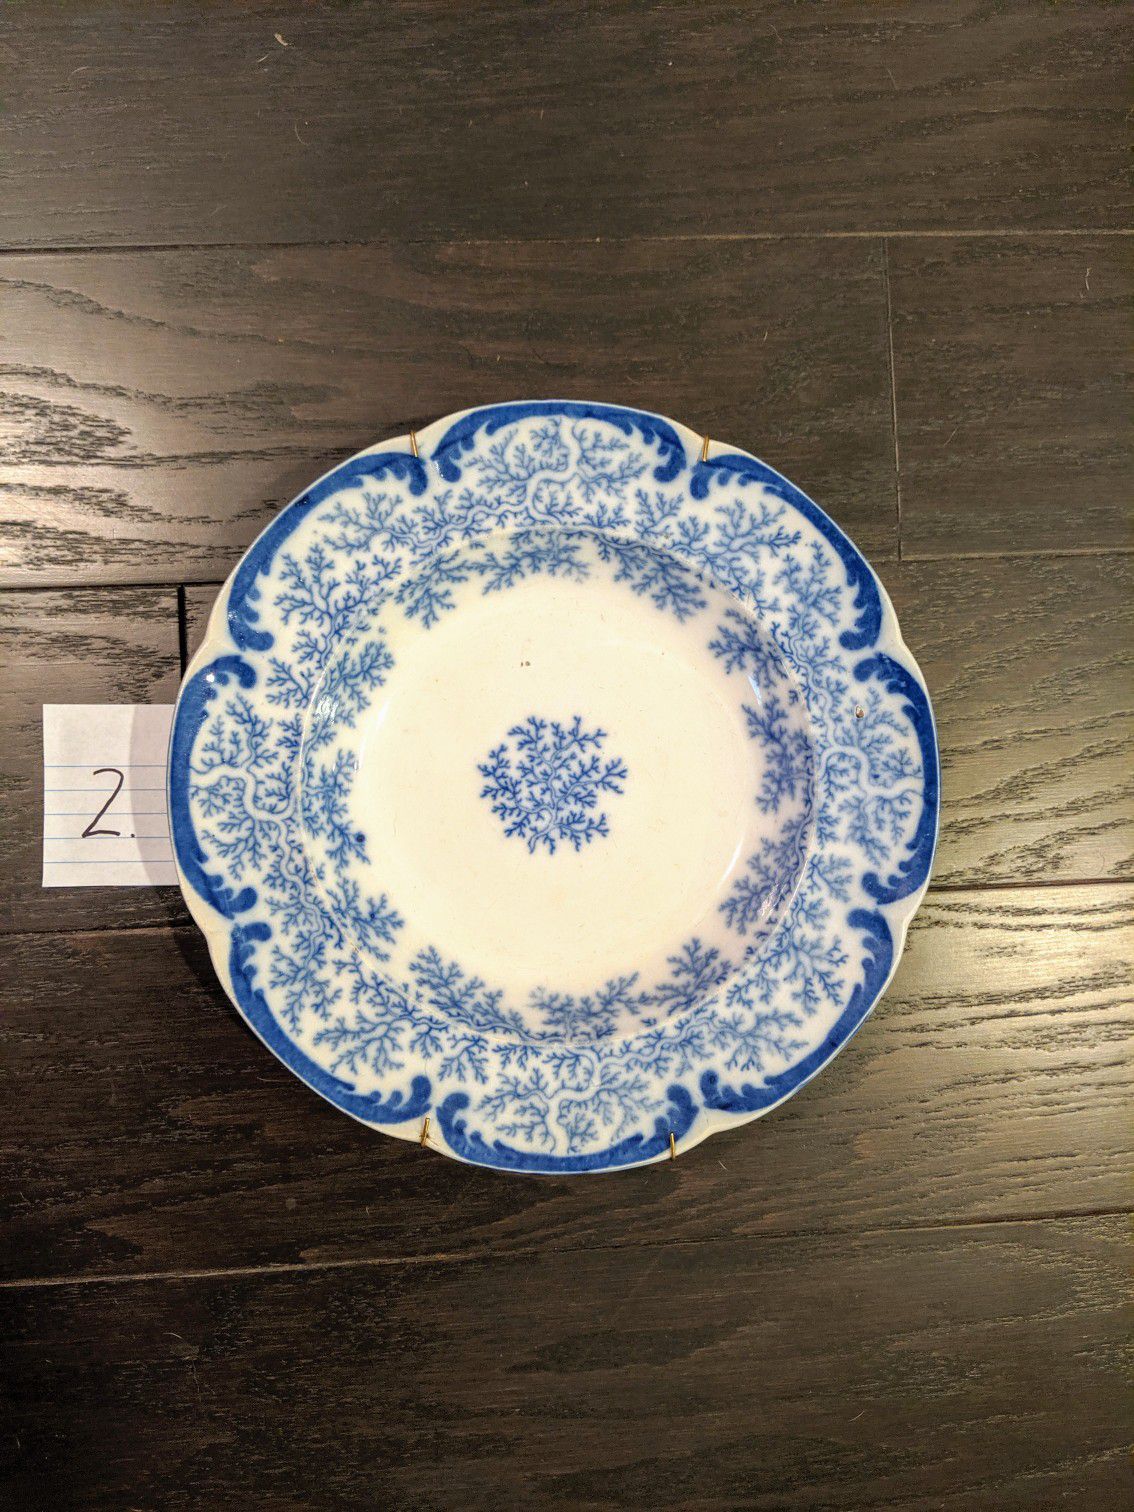 Antique China plate